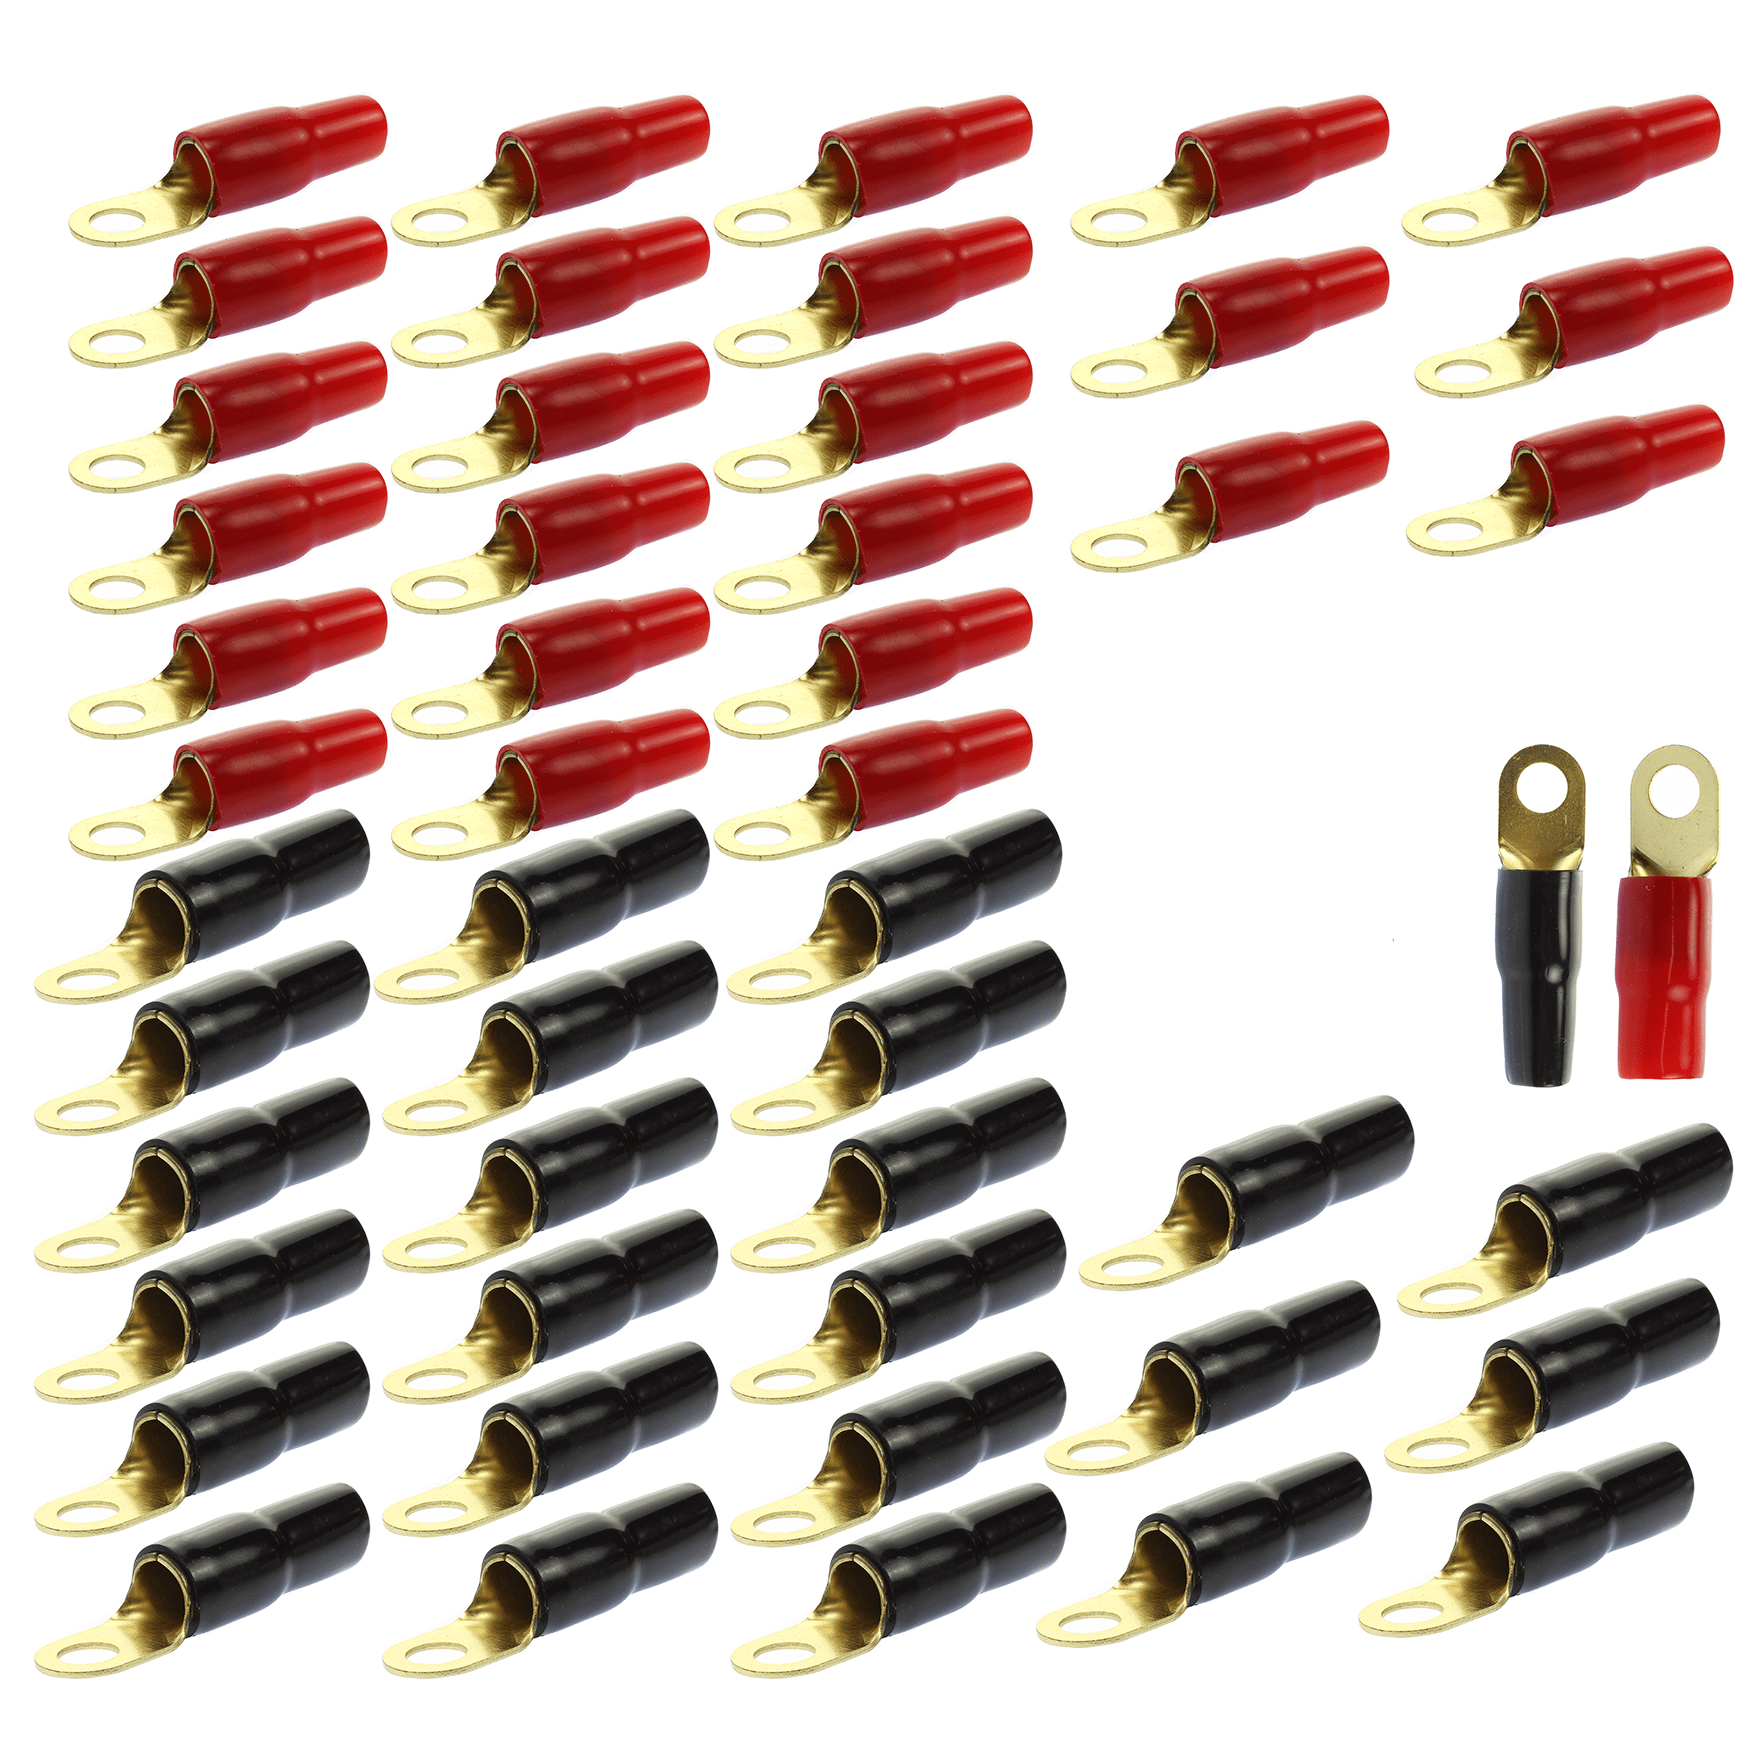 Voodoo 20 1/0 AWG Gauge Gold Wire Crimp Cable Ring Terminal Red Black Boots 5/16 Lug 